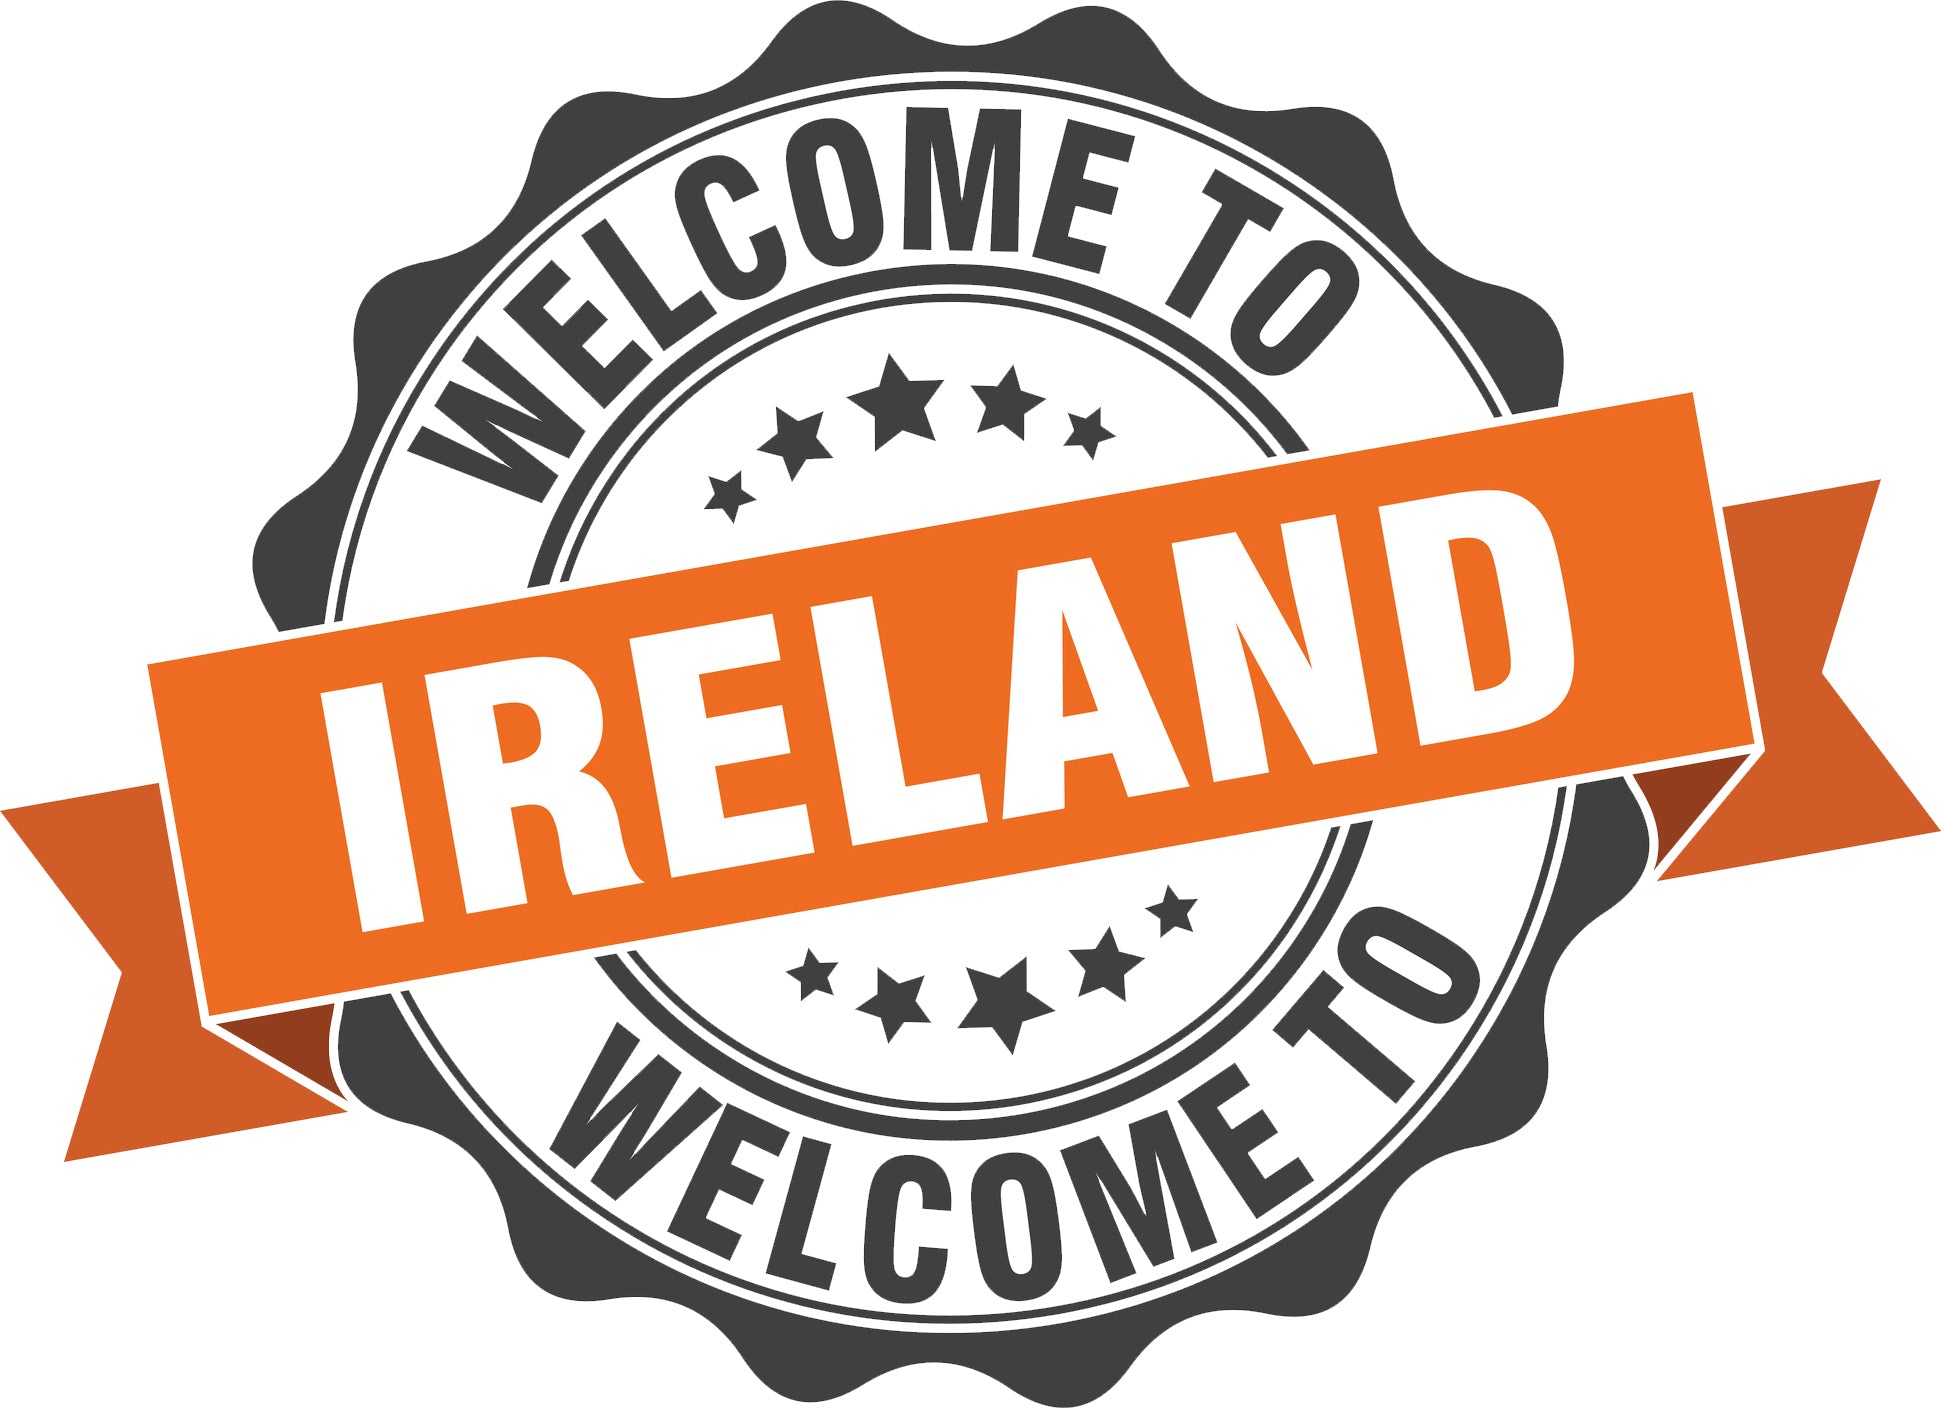 Cool Vintage Stamp Sign Cartoon Icon - Welcome to Ireland Vinyl Decal Sticker